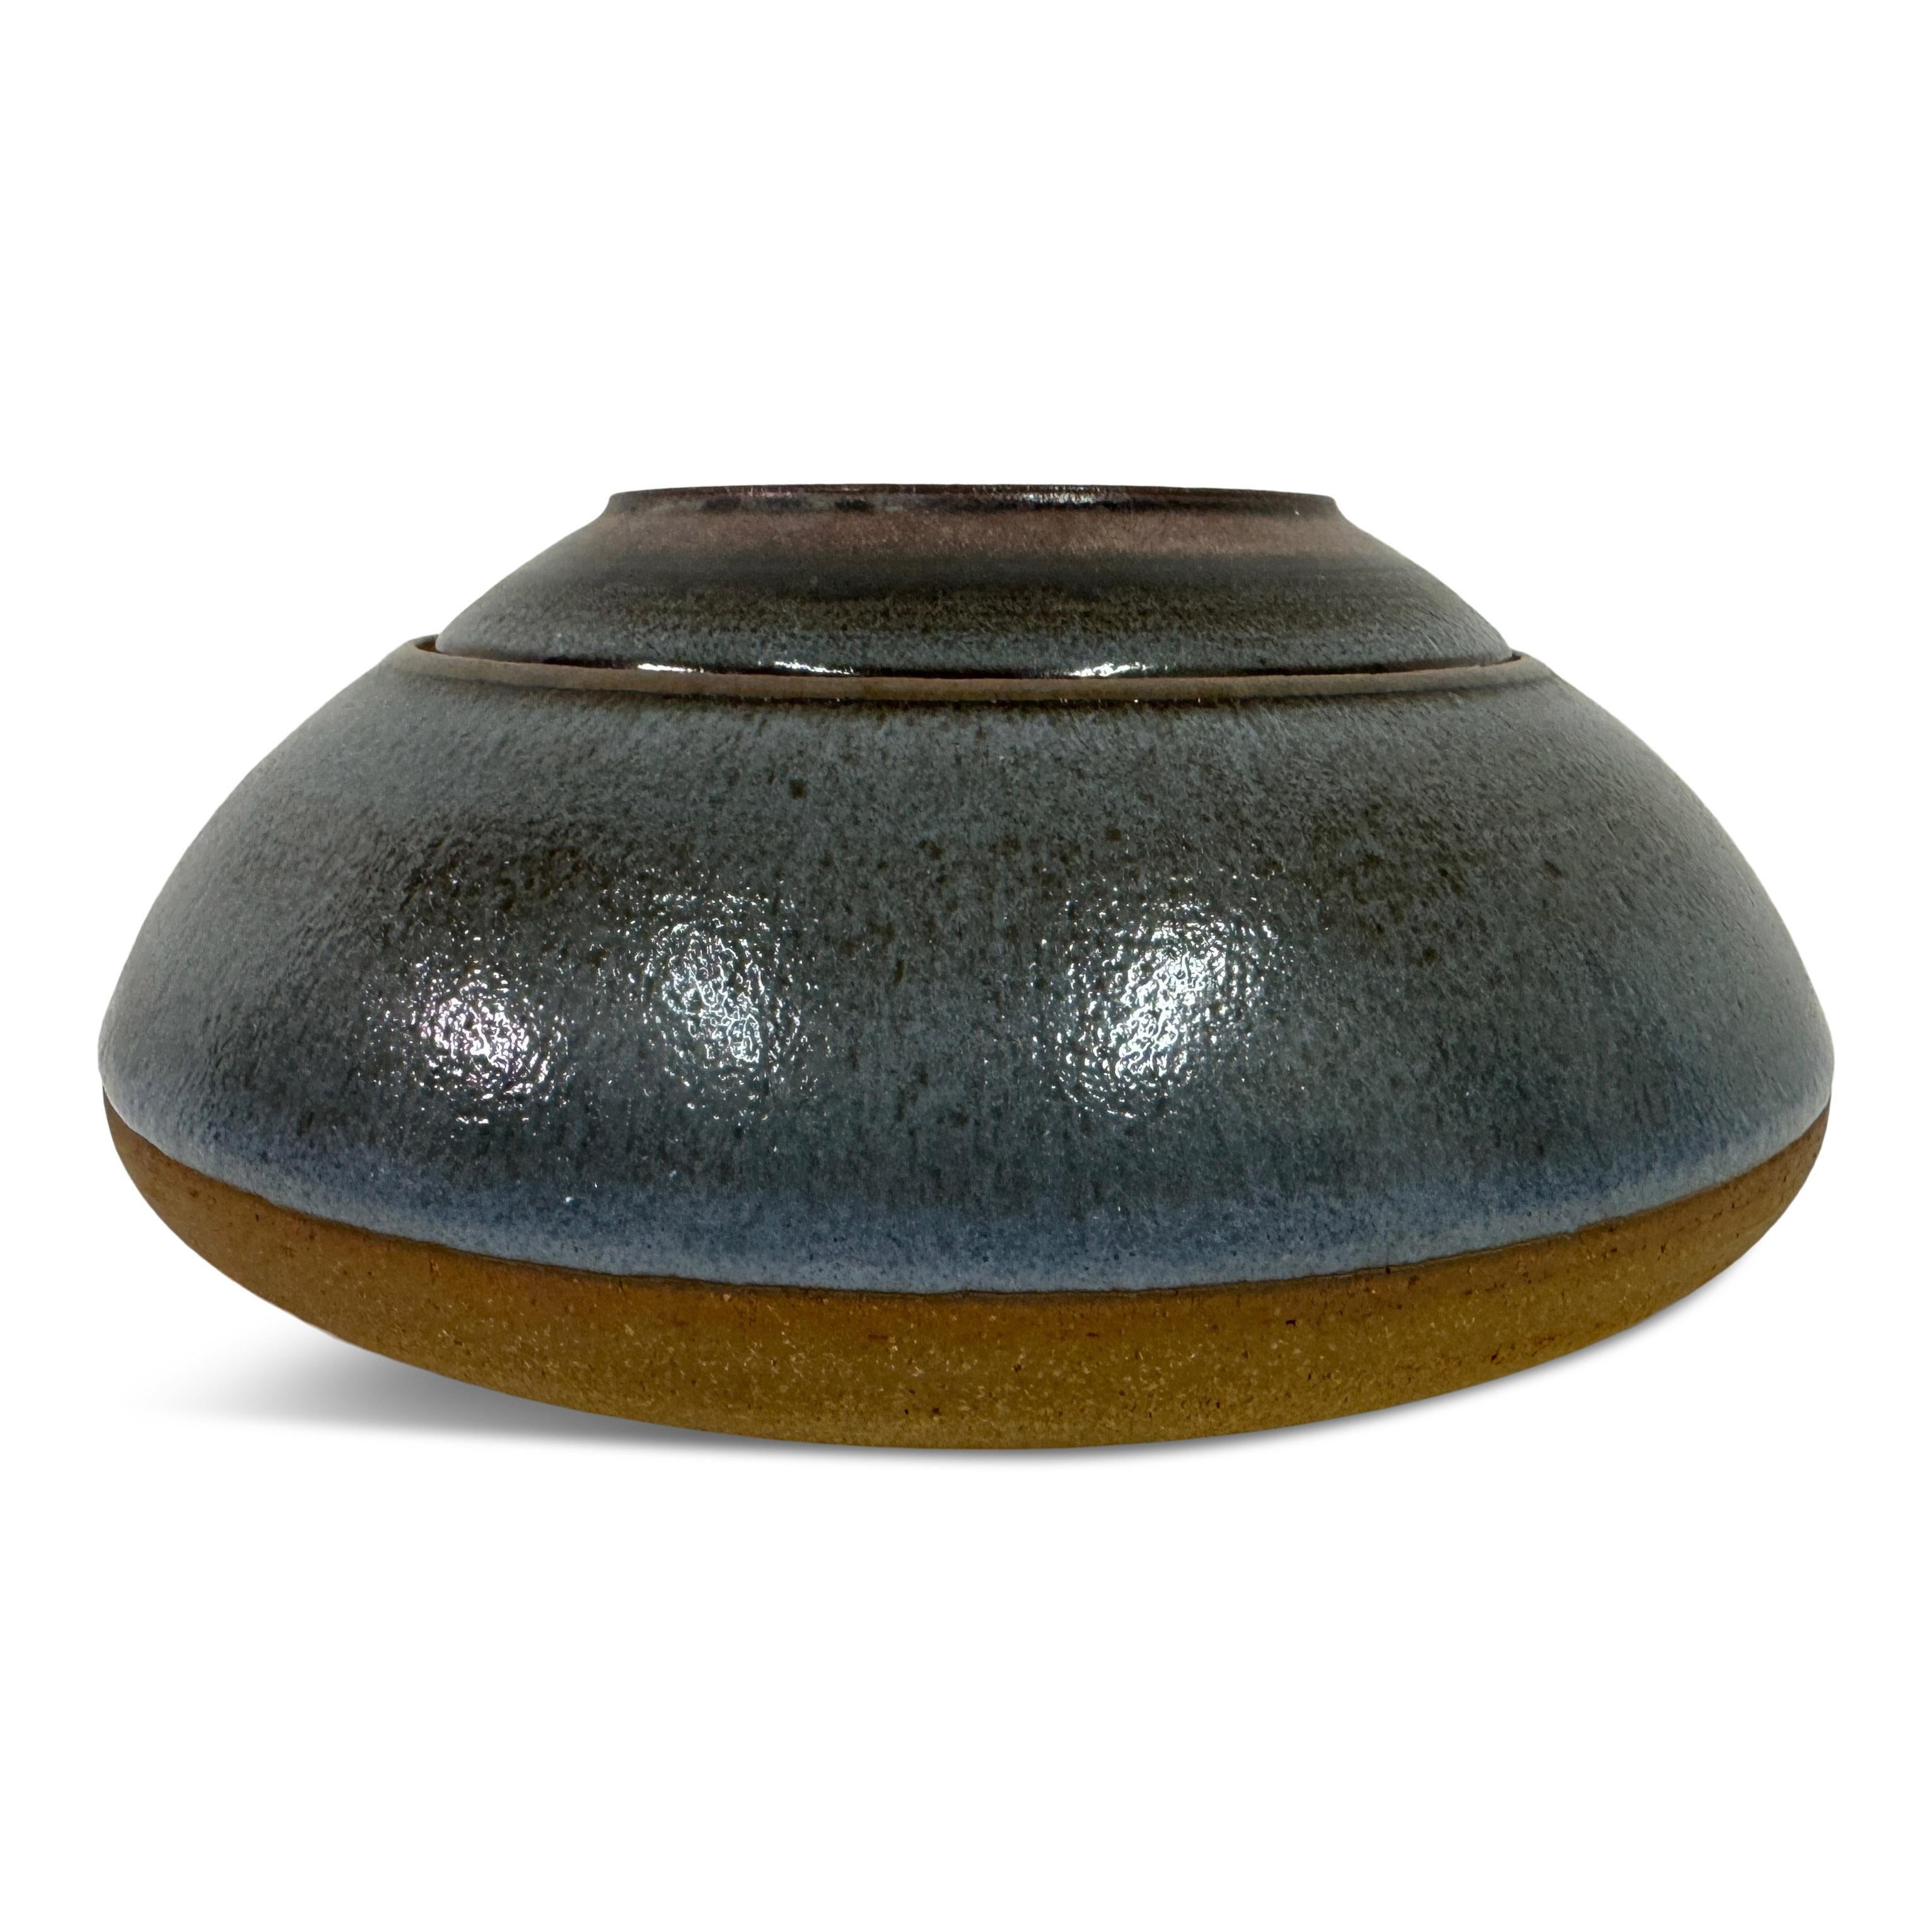 Lidded pot

By Nanni Valentini

For Ceramica Arcore

Ceramic

Removeable lid which can double up as a small dish

Signed underneath

Italy 1960s